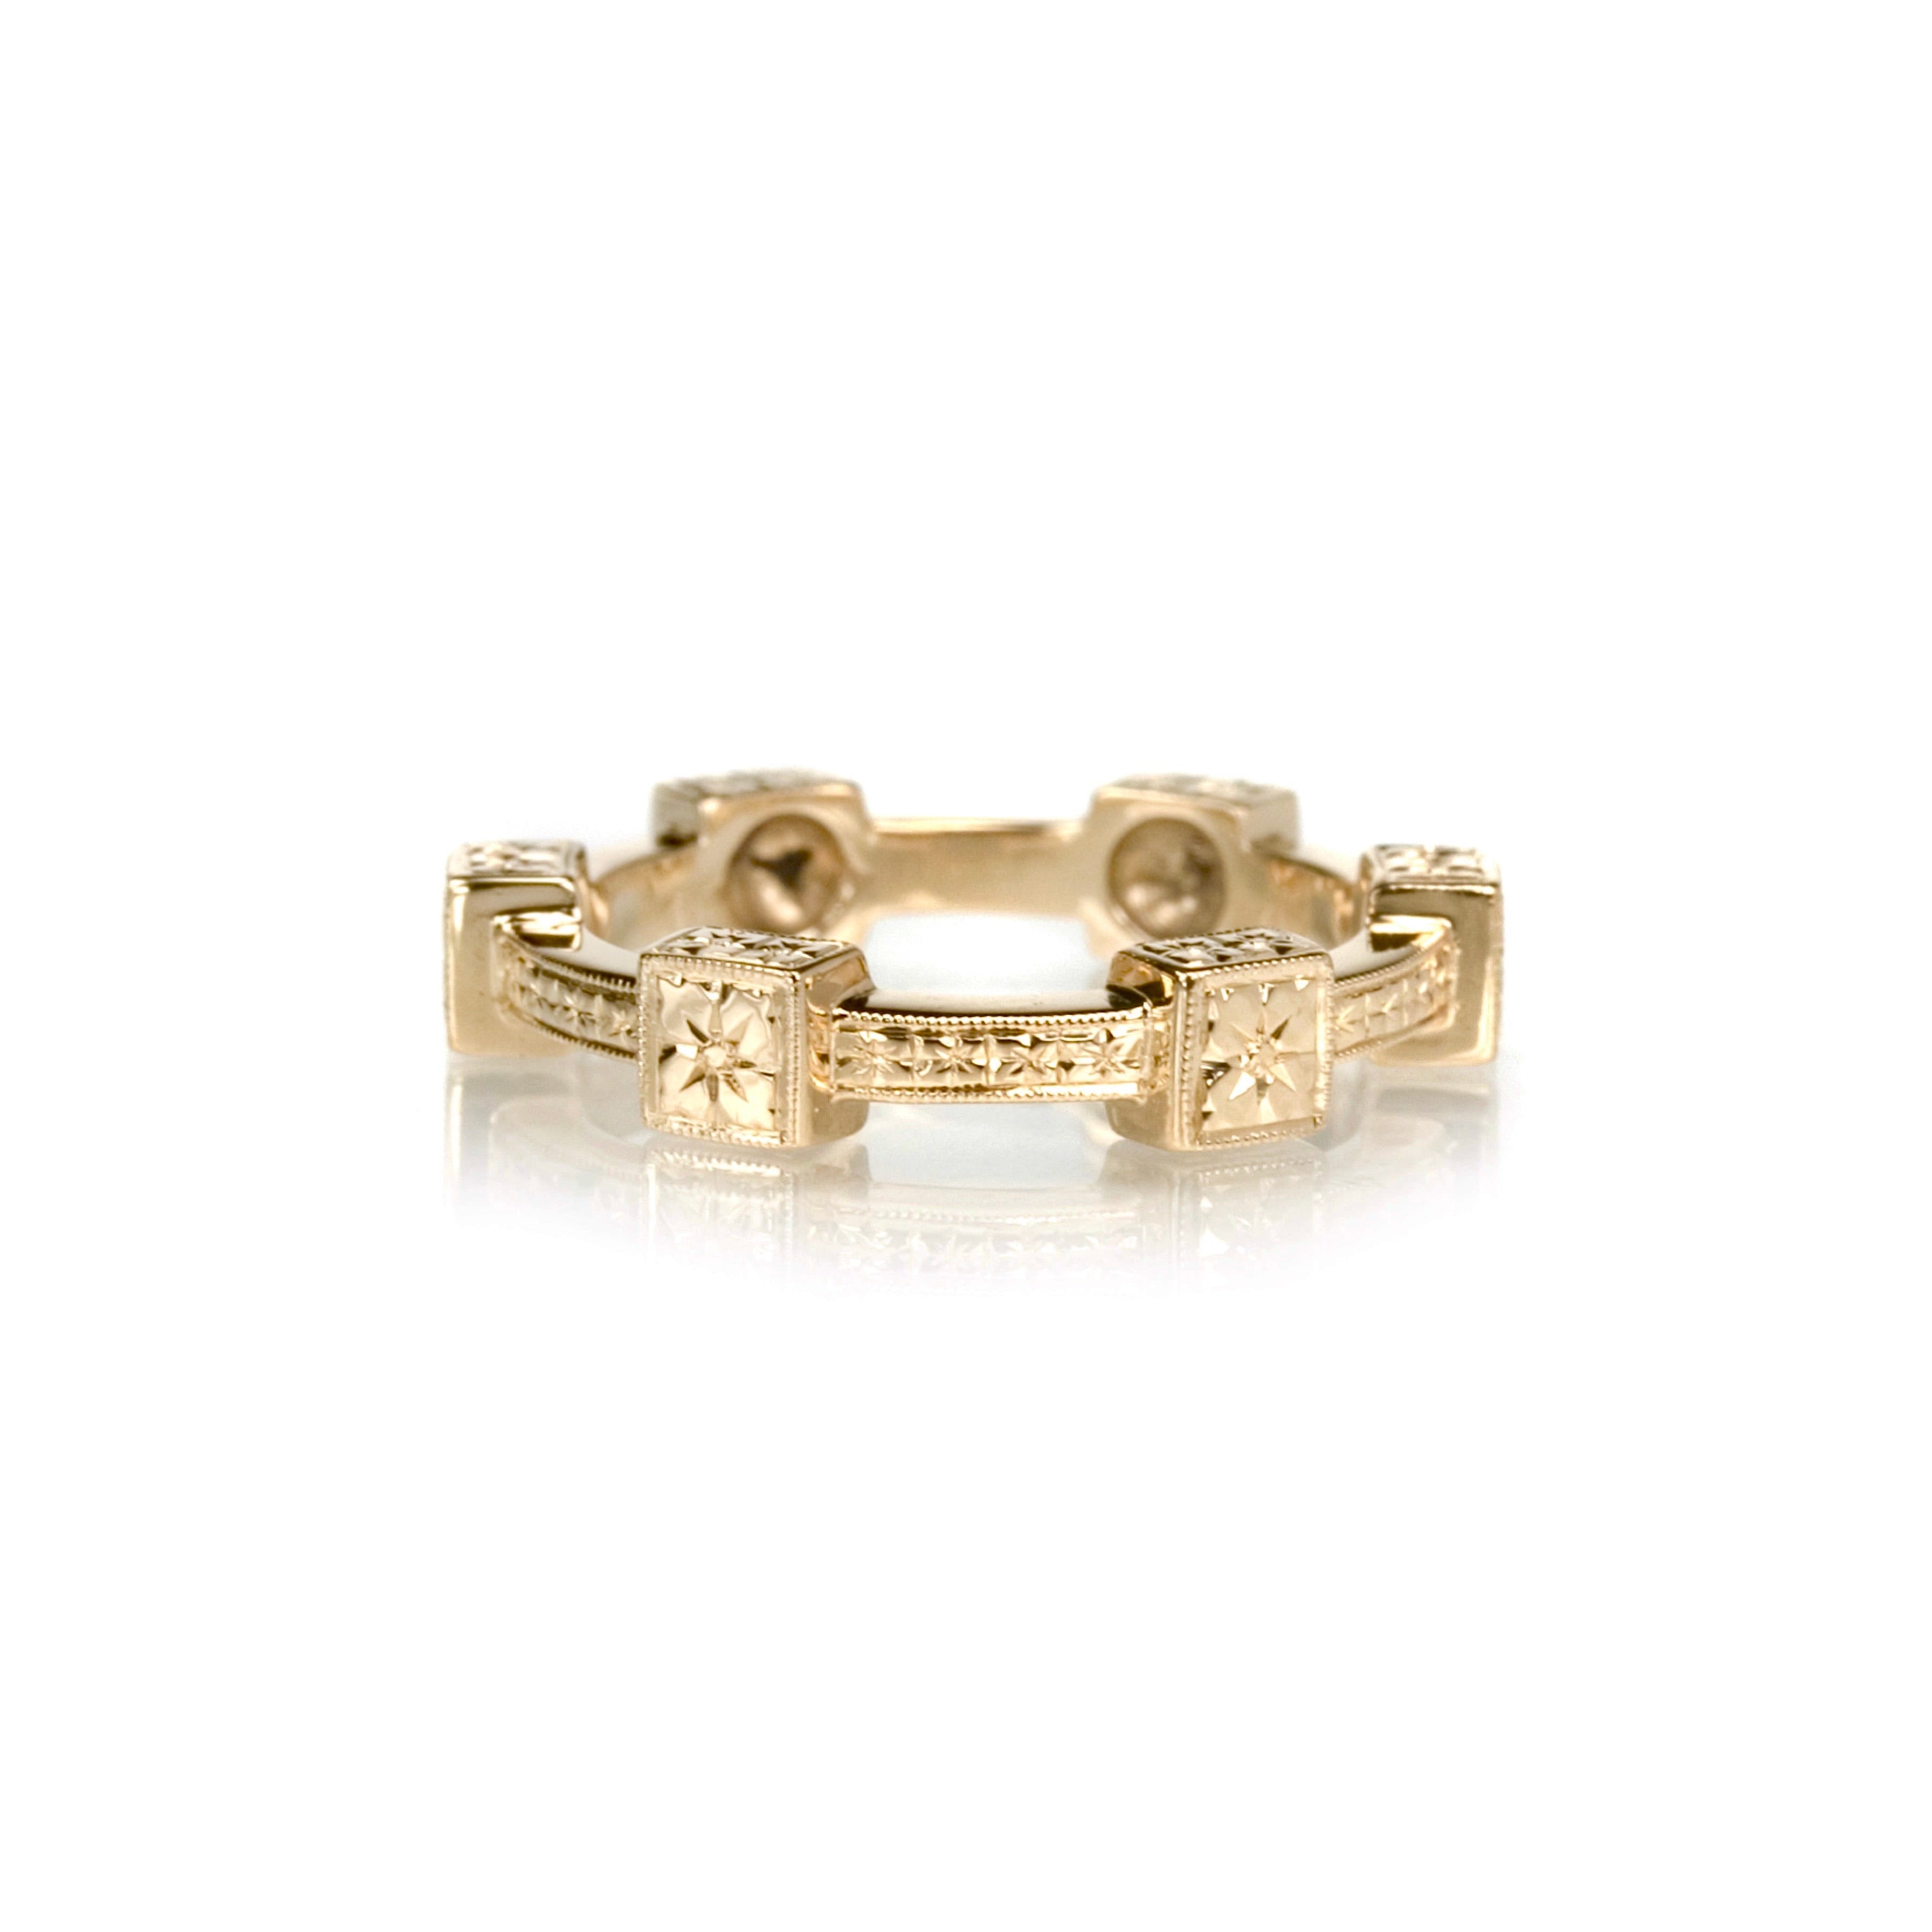 Crafted in 14KT yellow gold, this ring features orange blossom hand-engravings in square settings and on the band. 